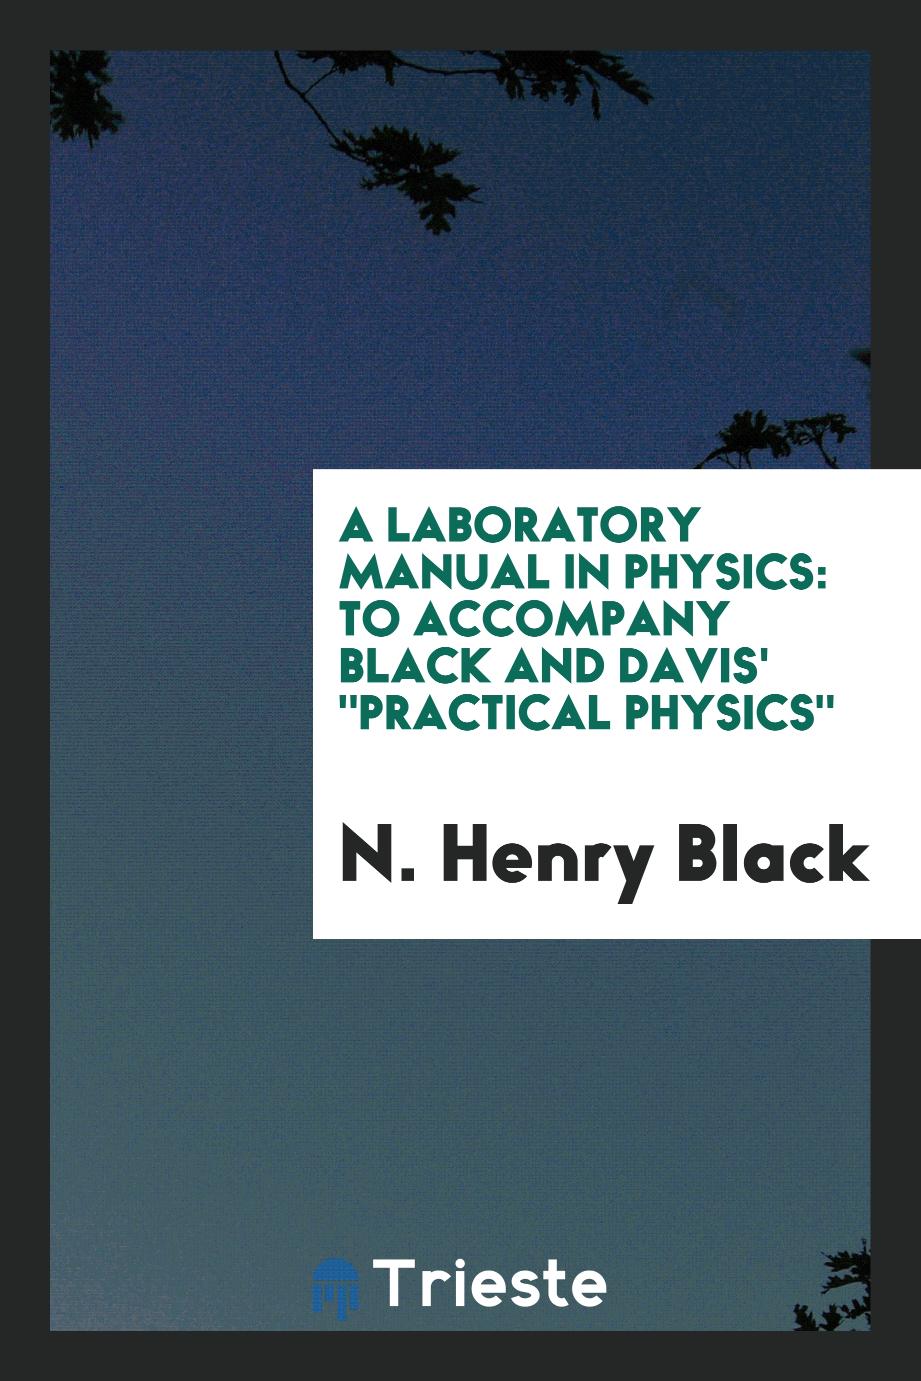 A Laboratory Manual in Physics: To Accompany Black and Davis' "Practical Physics"